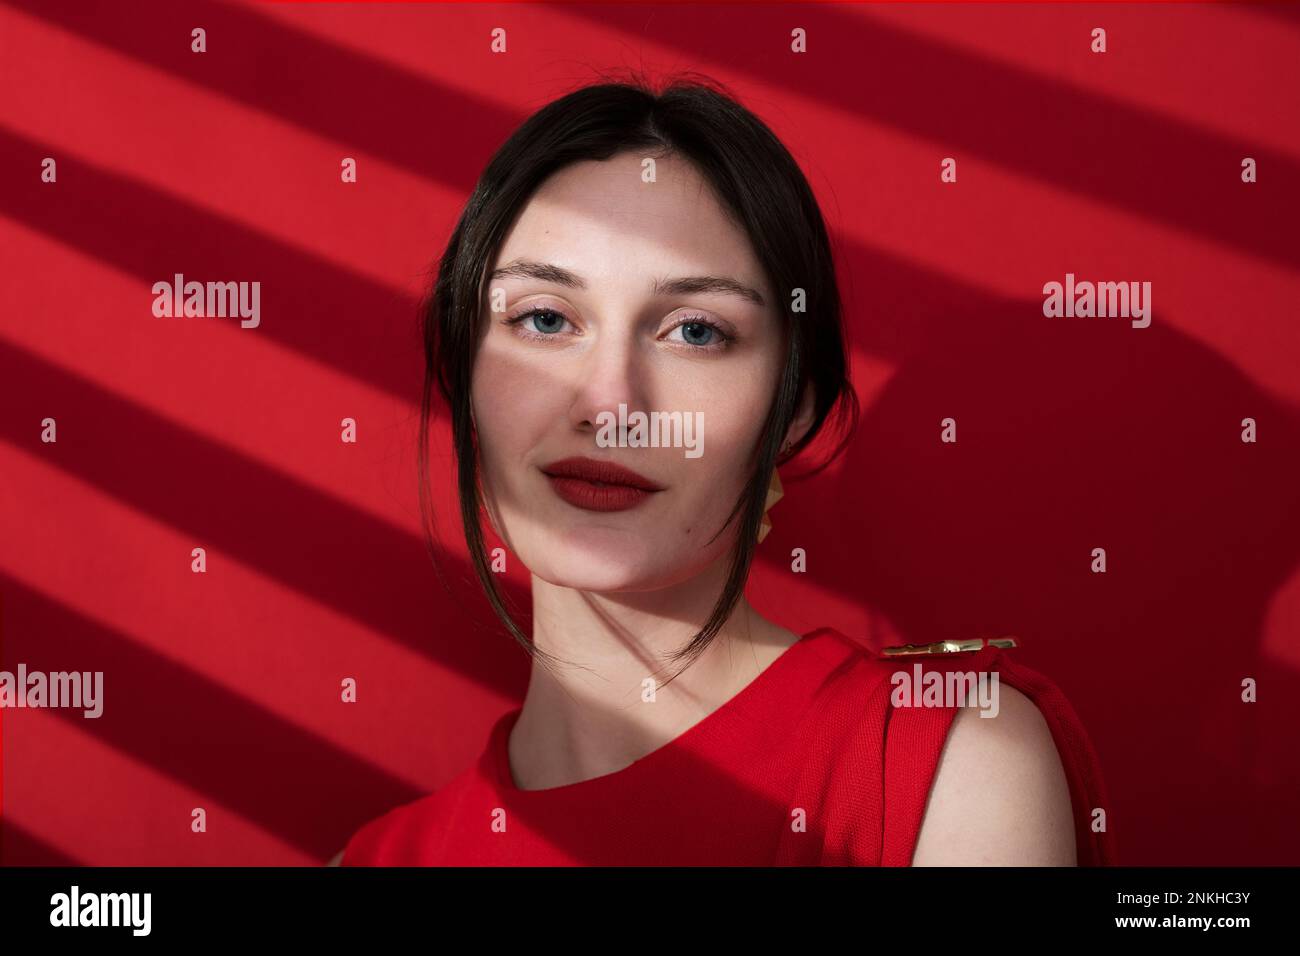 Beautiful young woman wearing red lipstick over colored background Stock Photo